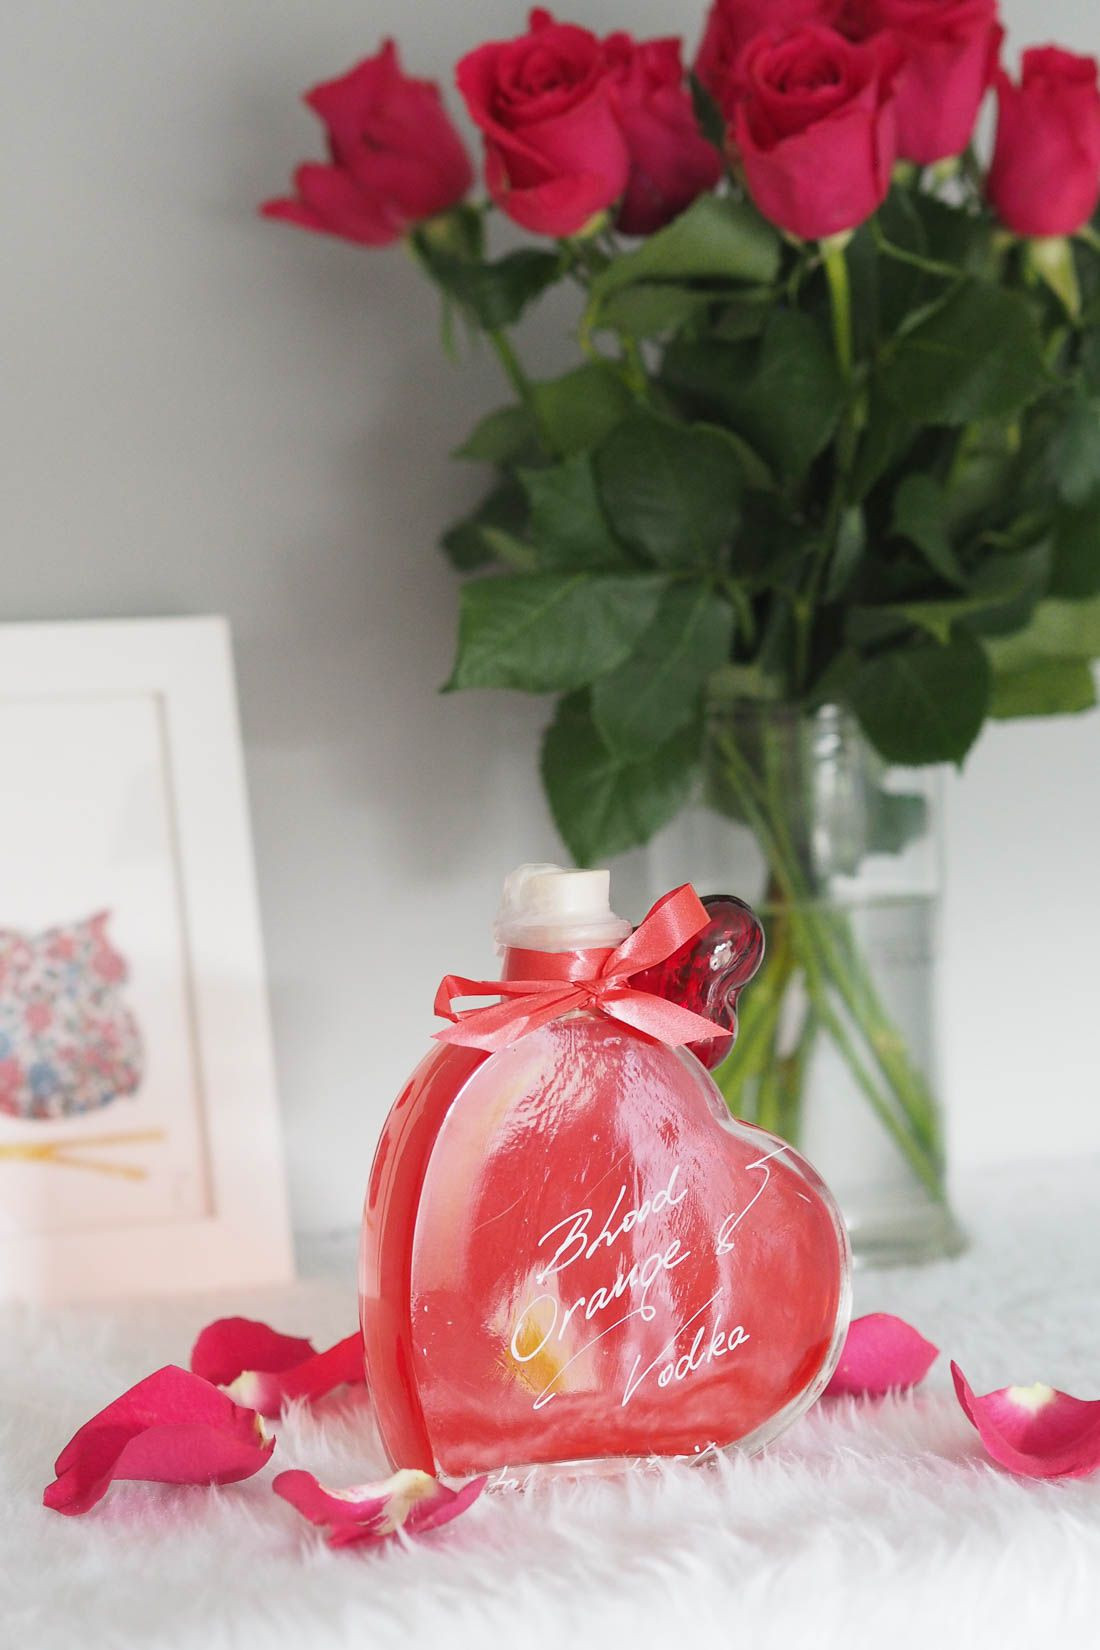 Valentine Gift Ideas For Her Uk
 Valentines Day Gift Ideas For Her